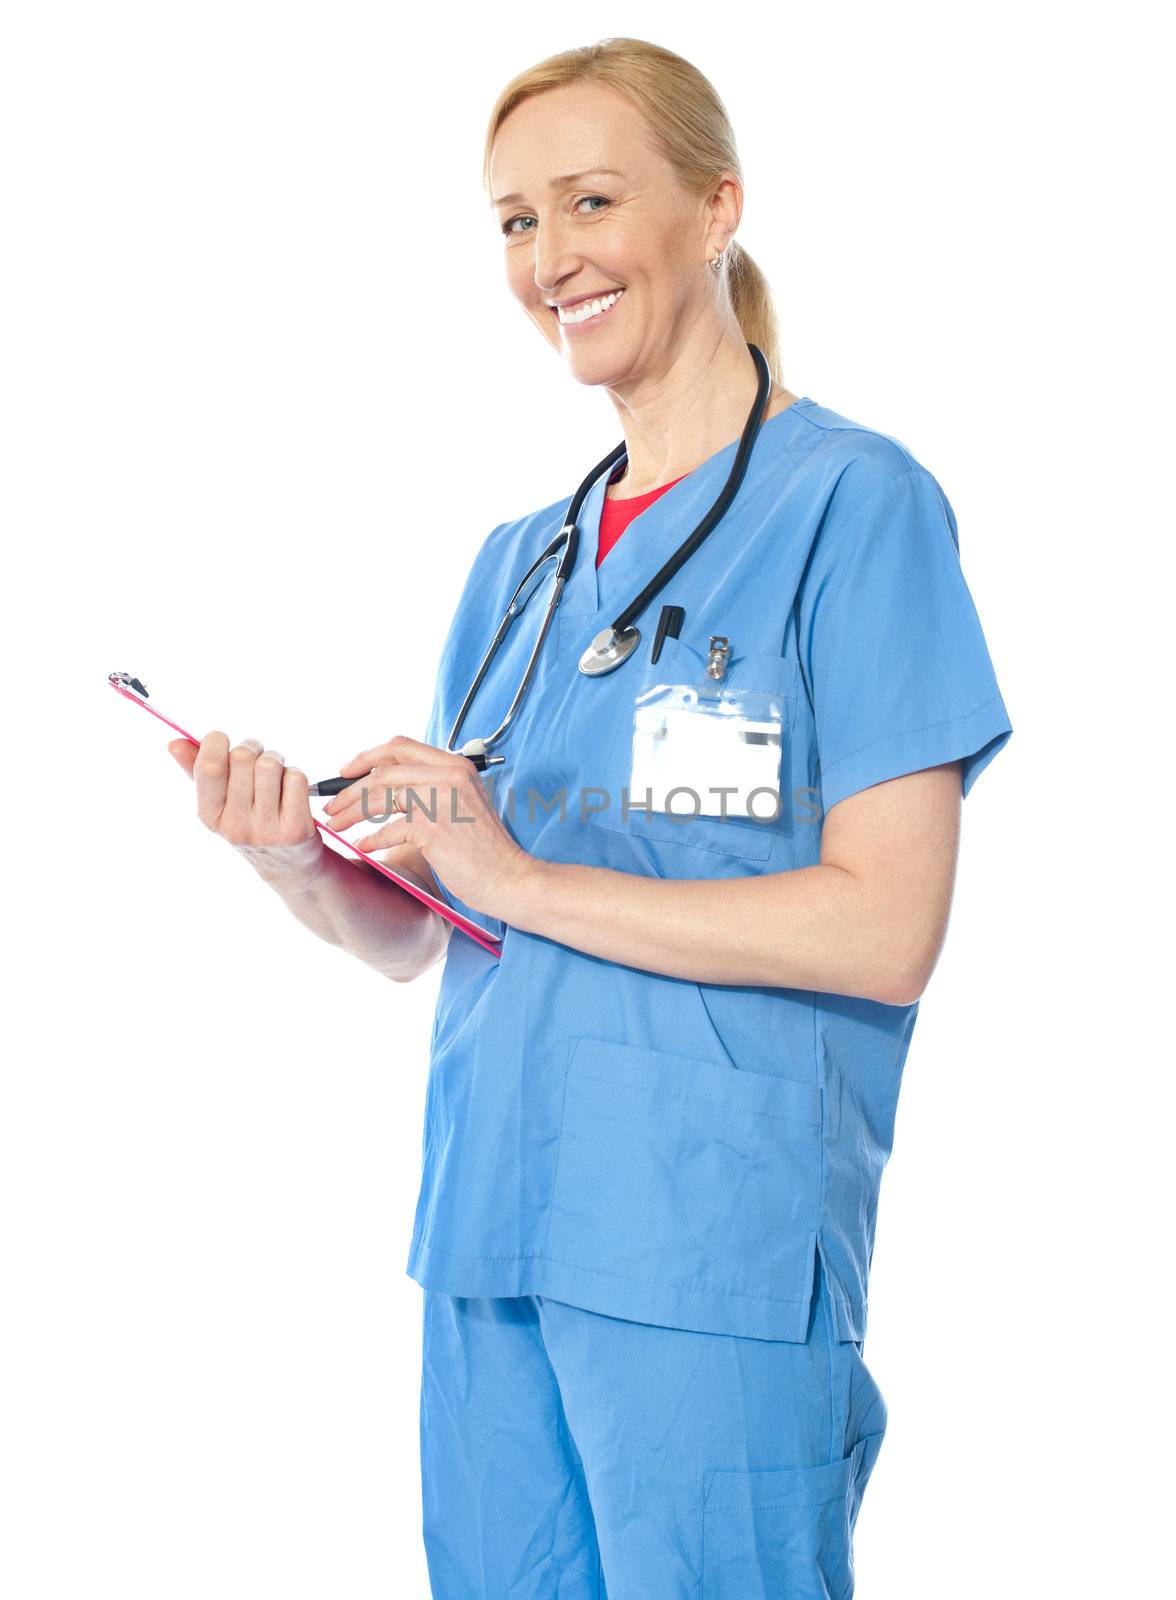 Confident senior doctor, portrait by stockyimages